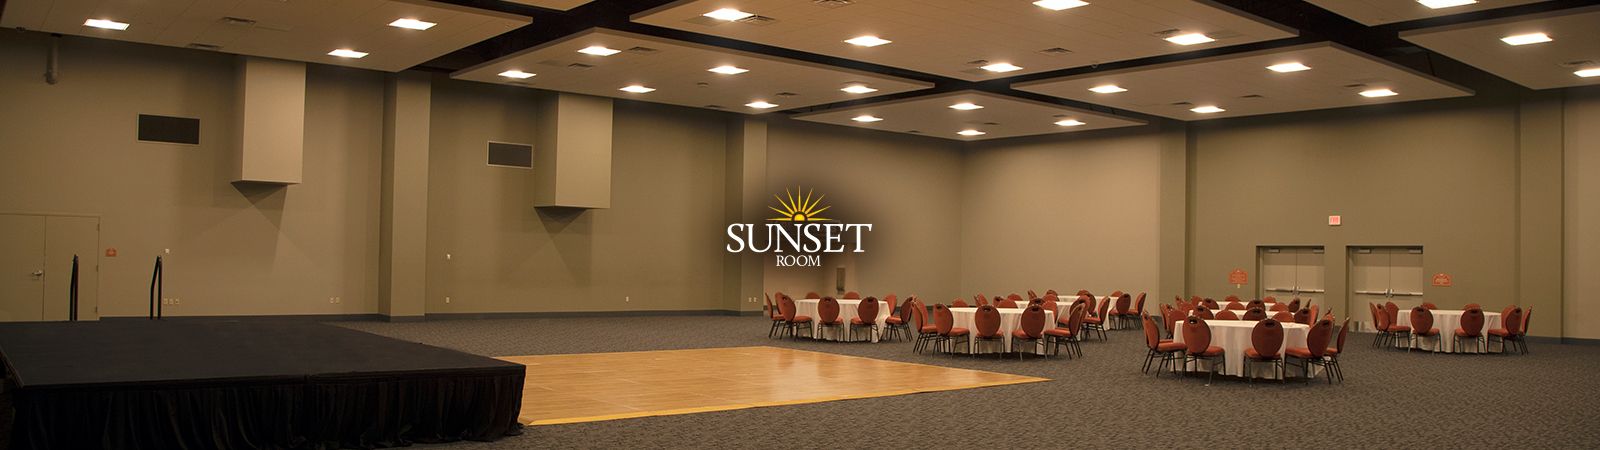 Sunset Room at Casino of the Sun